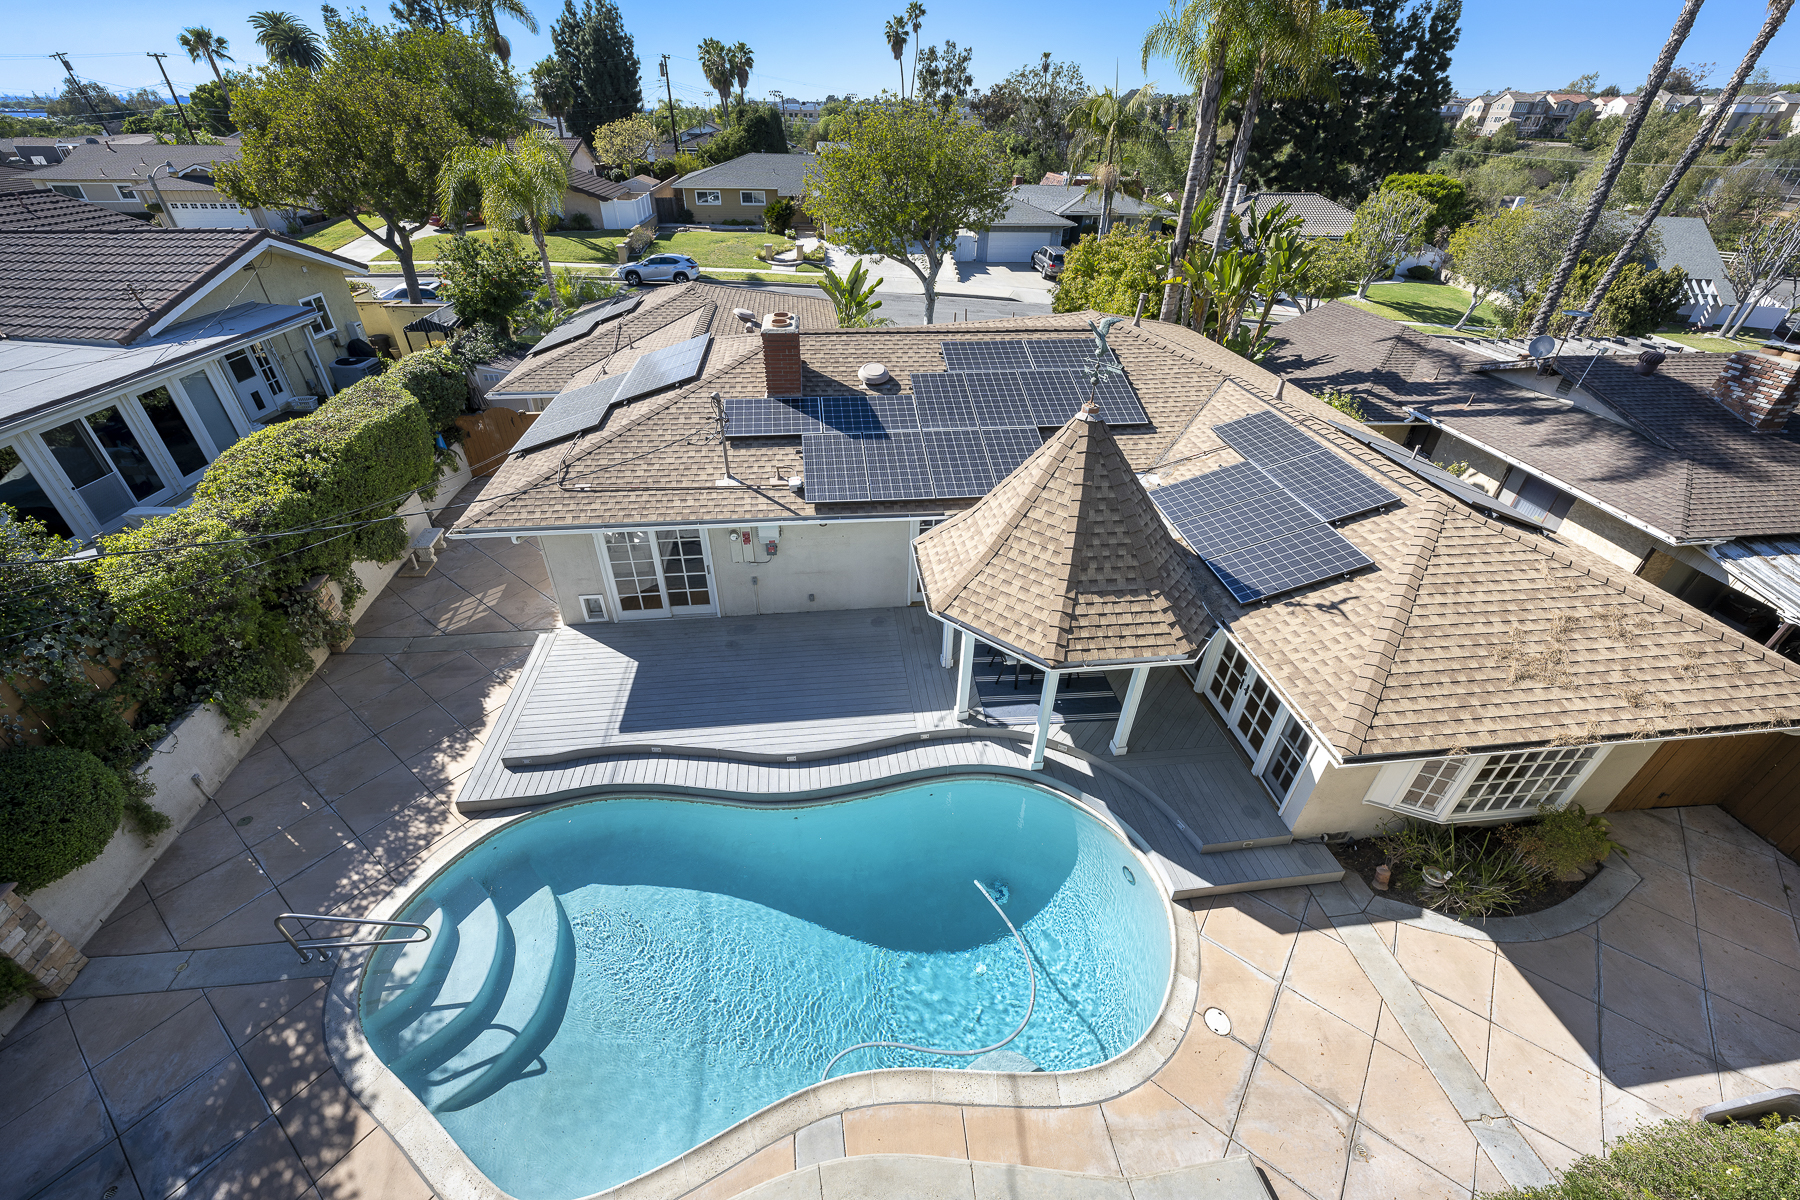 806 N. Adlena Drive, Fullerton, CA 92833: Aerial view of pool and back of house, solar panels.